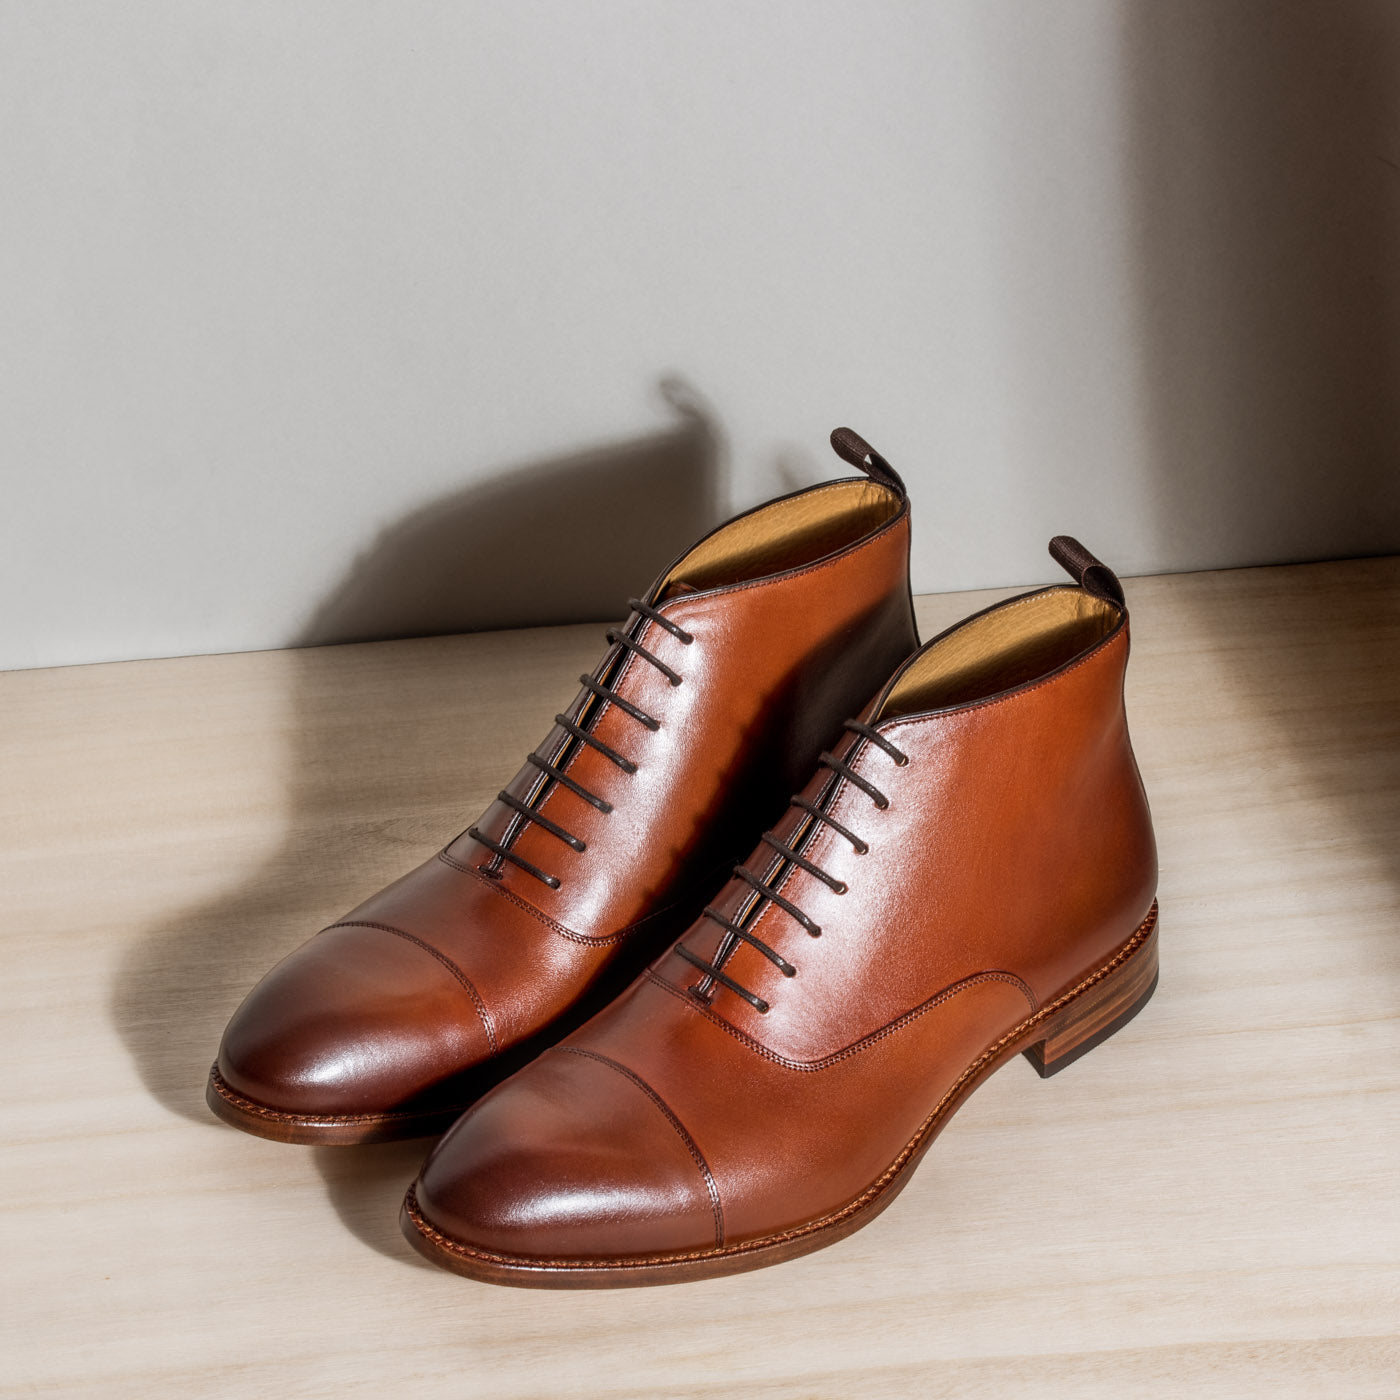 Beckett Simonon Preston Chelsea Boot Review: A Robust Yet Stylish Casual  Option 